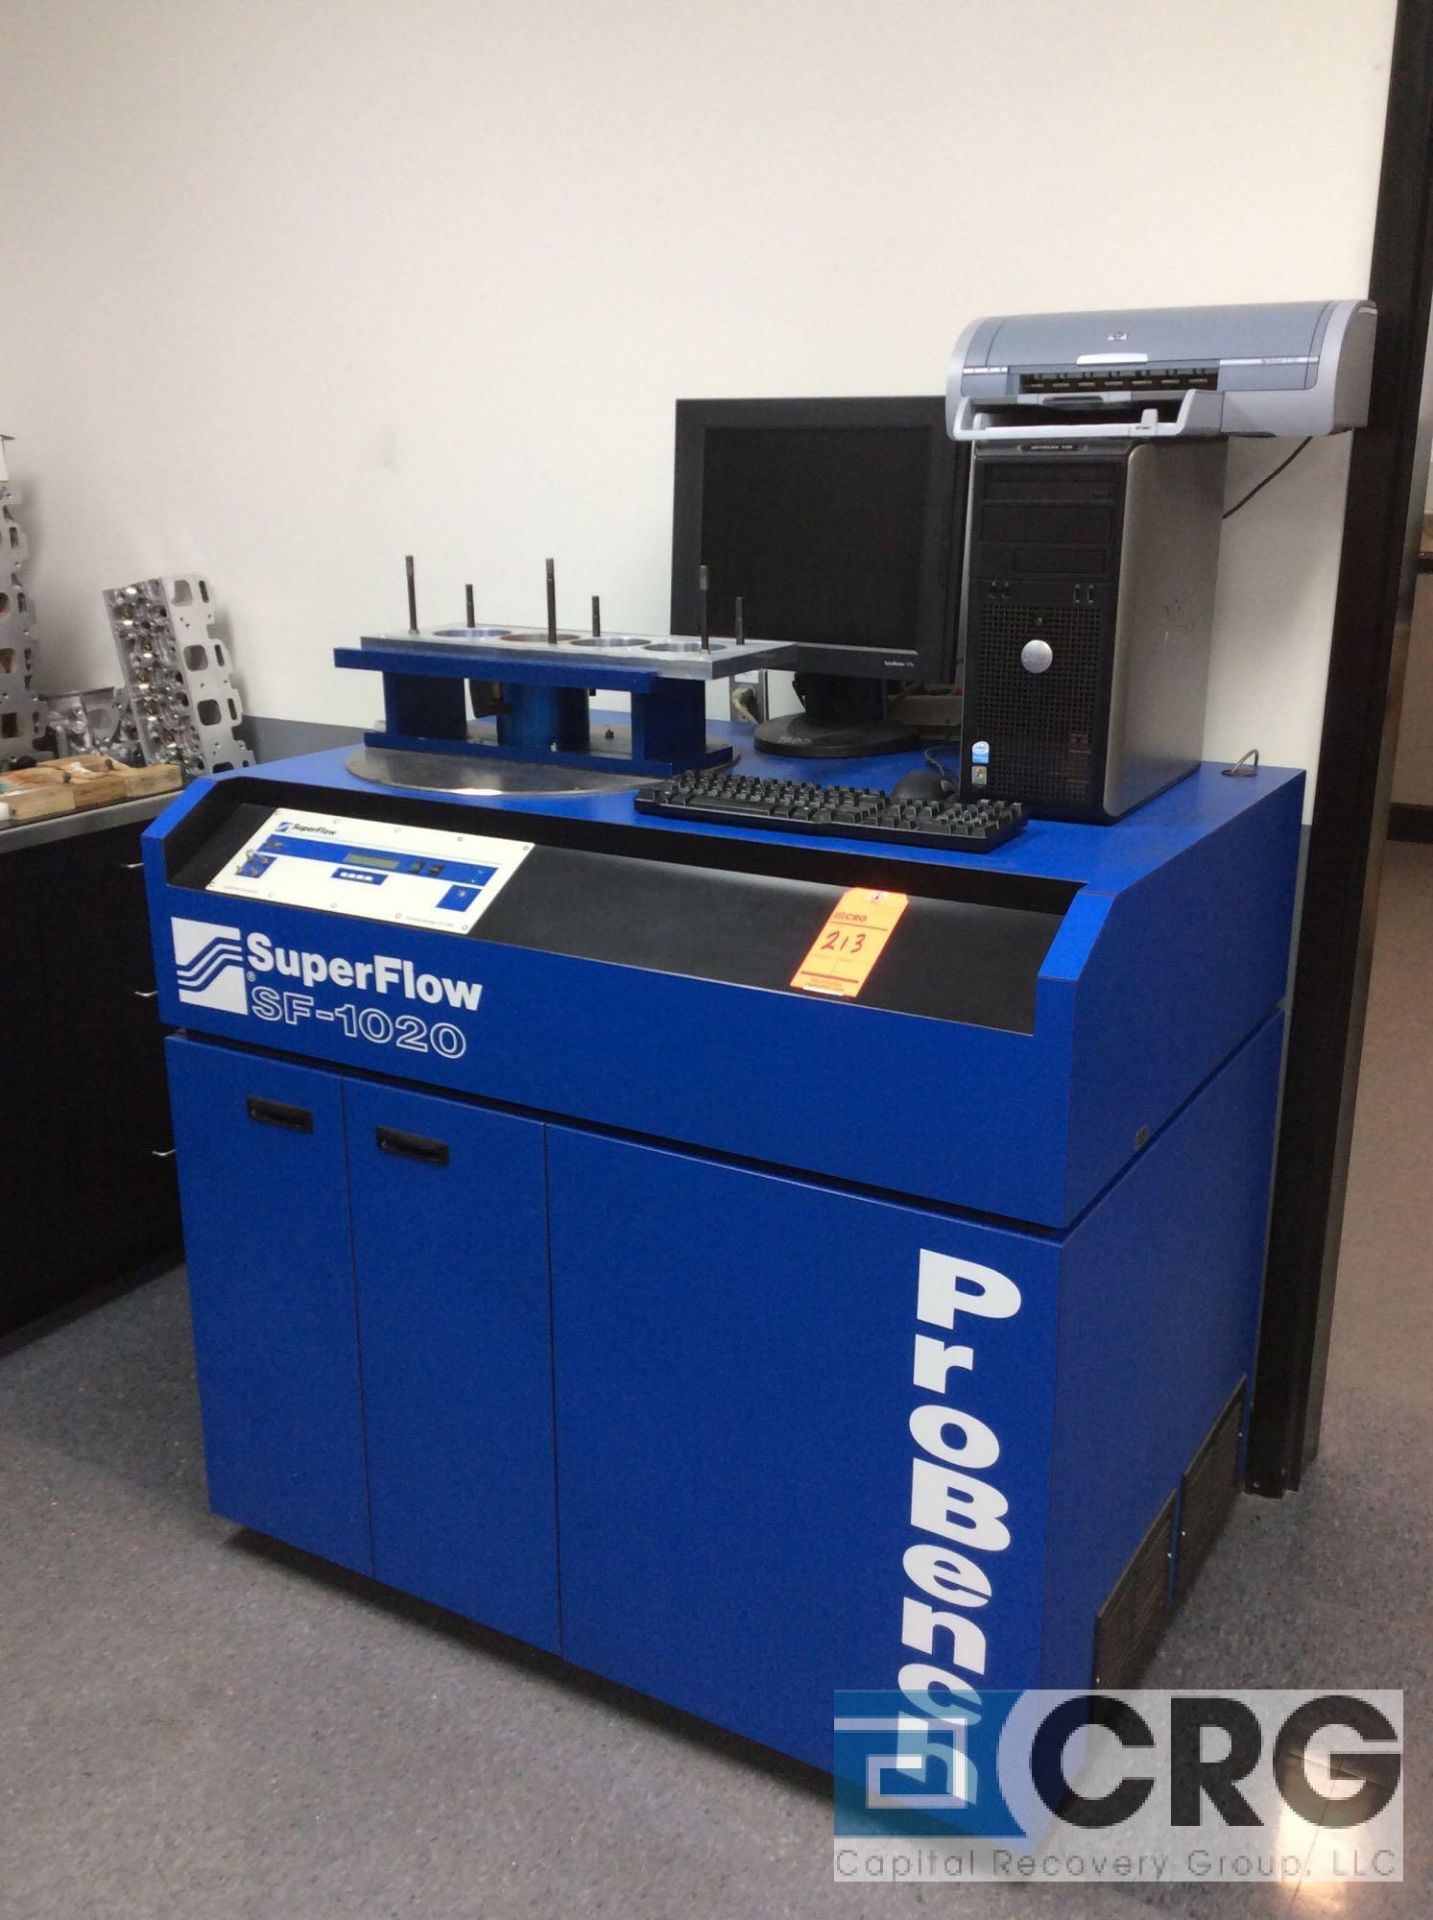 SuperFlow SF1020 Probench computerized flowbench with computer, printer, accessories